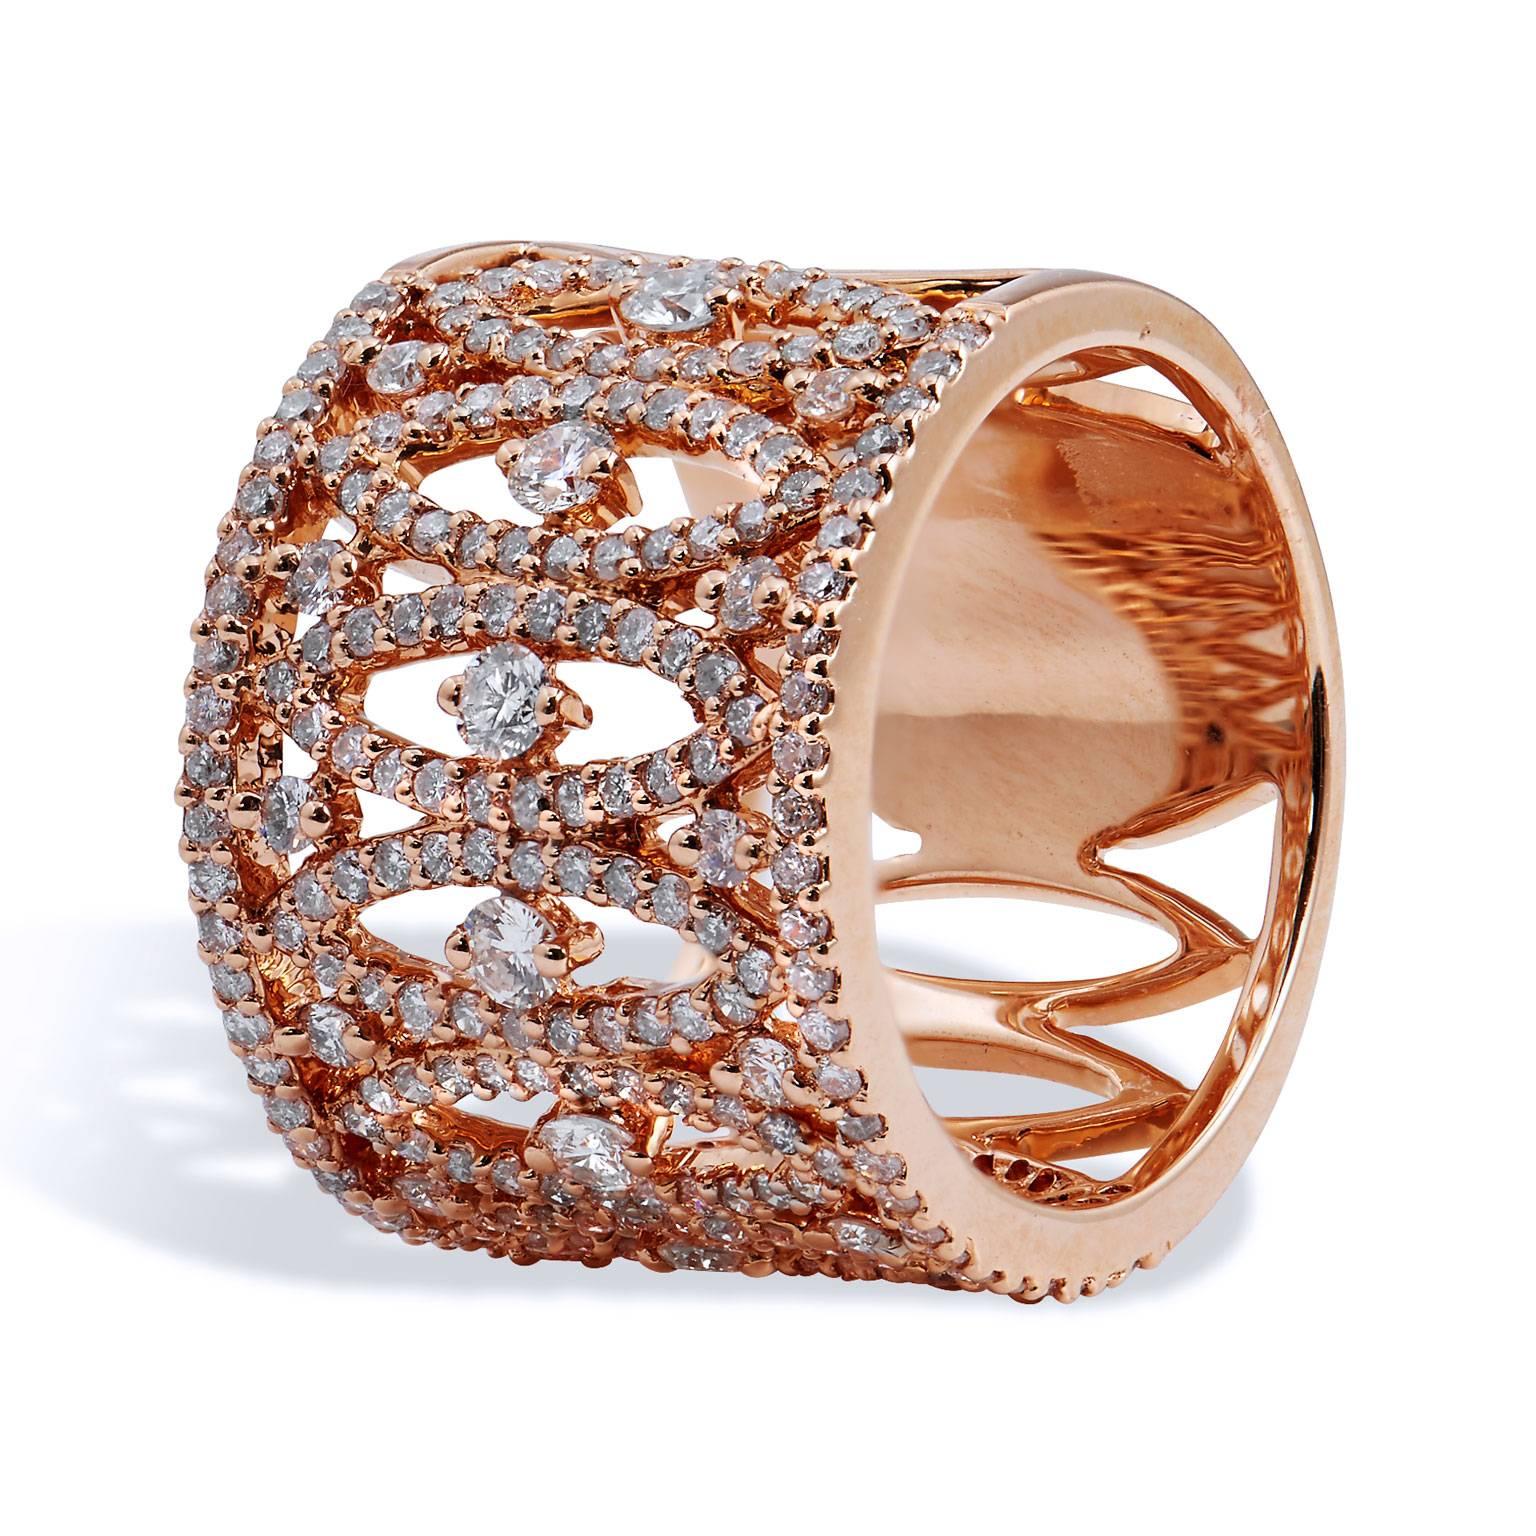 1.50 Carat Pave Diamond Geometric Rose Gold Ring

This stunning, geometric-shaped, delicately designed ring is fashioned in 18 karat rose gold and features 1.50 carat of pave-set diamonds (G/H/VS).